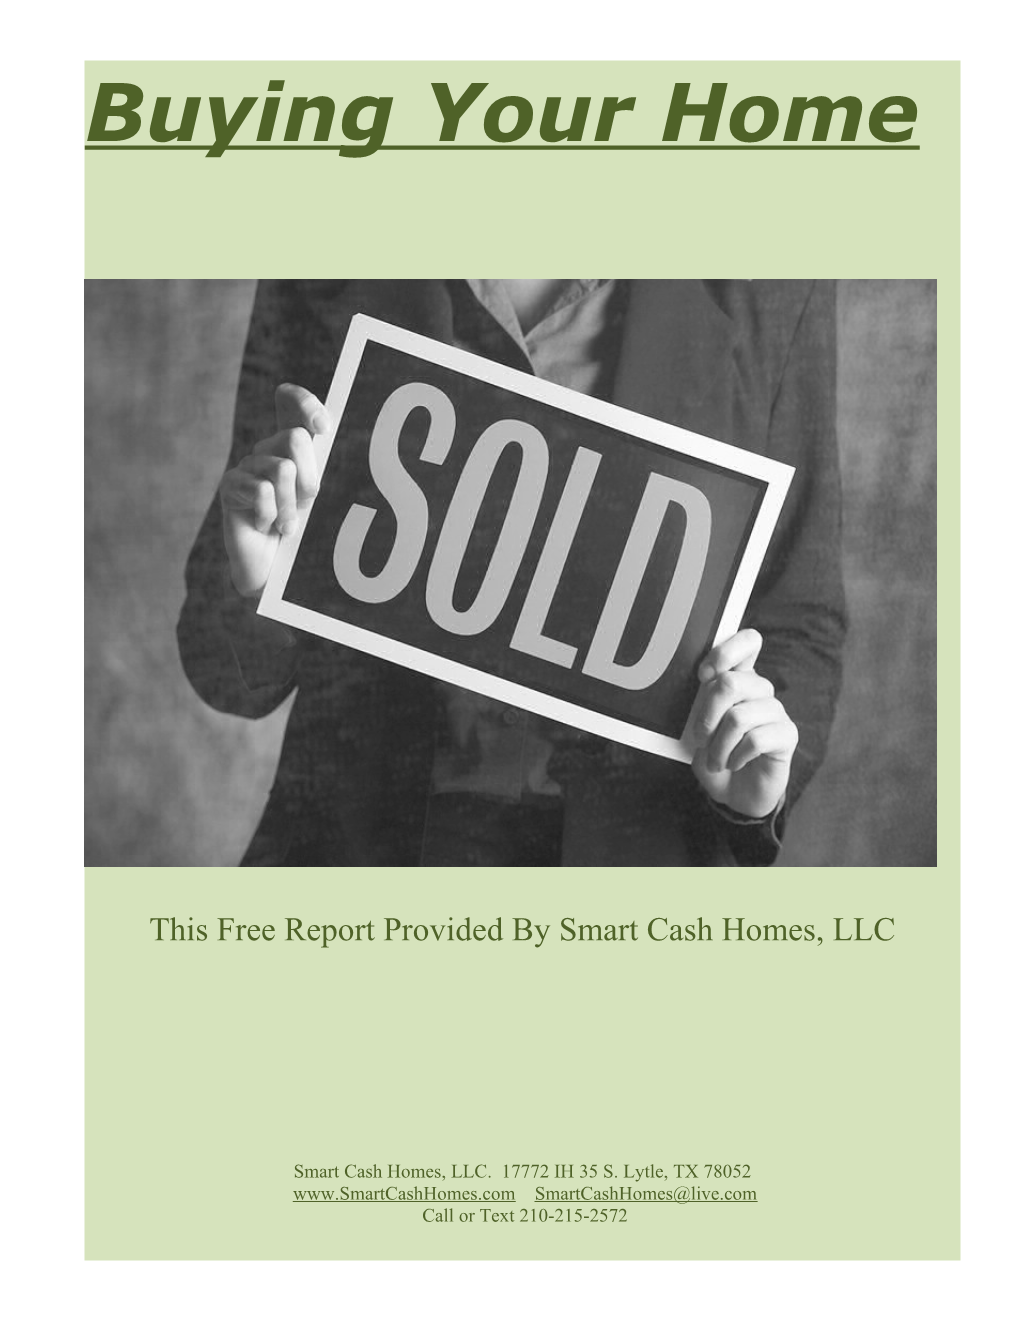 This Free Report Provided by Smart Cash Homes, LLC